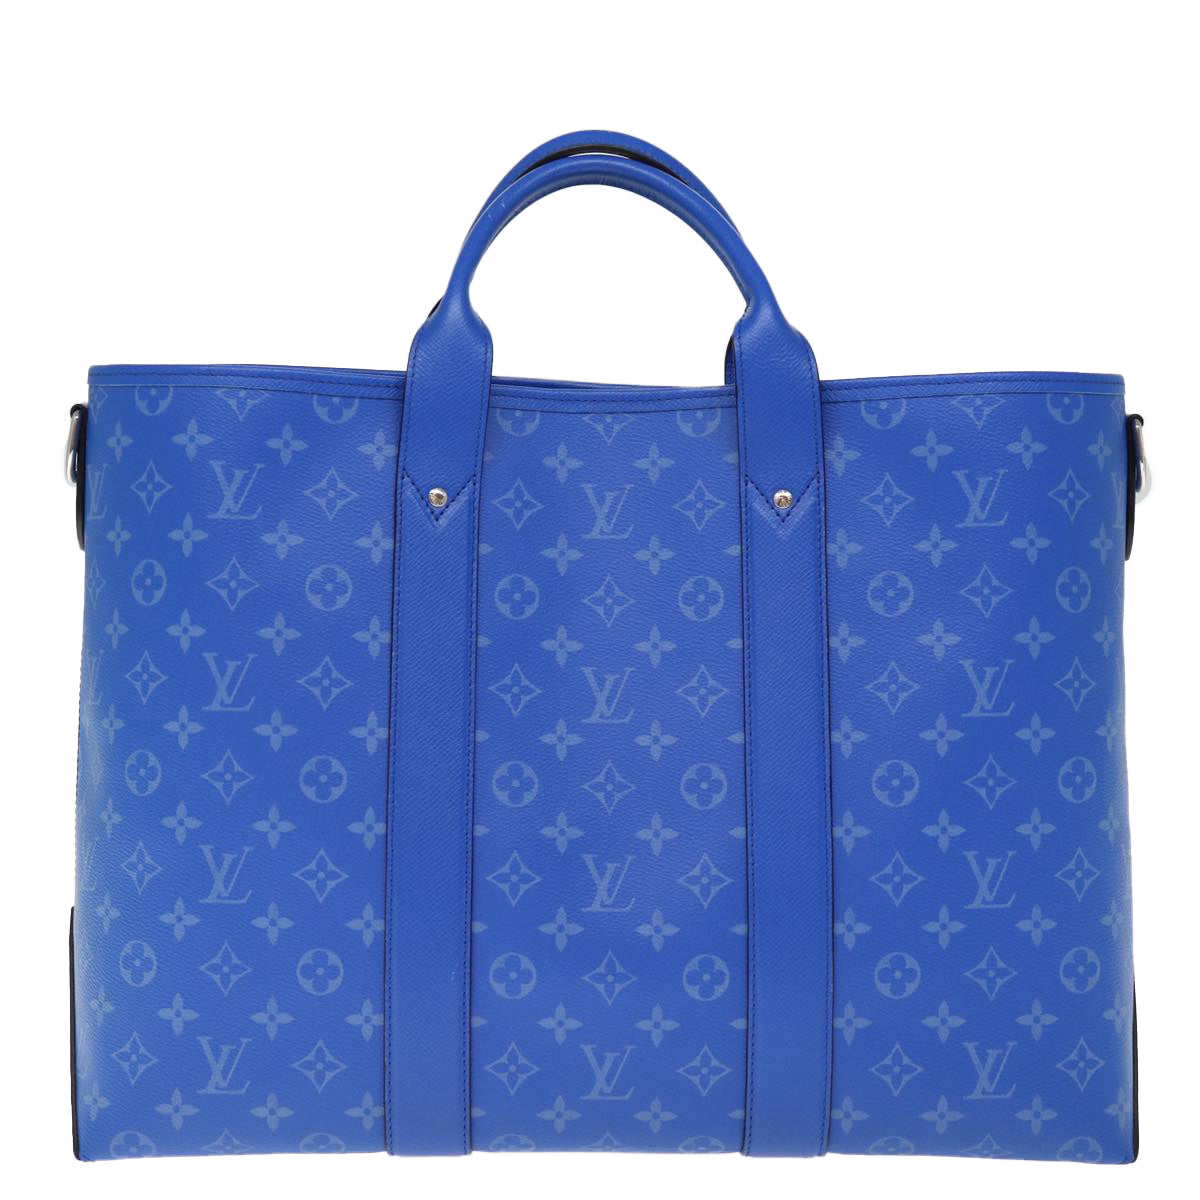 LOUIS VUITTON Taigalama Weekend Tote NM Tote Bag 2way Blue M31010 LV Auth 74022S - 0